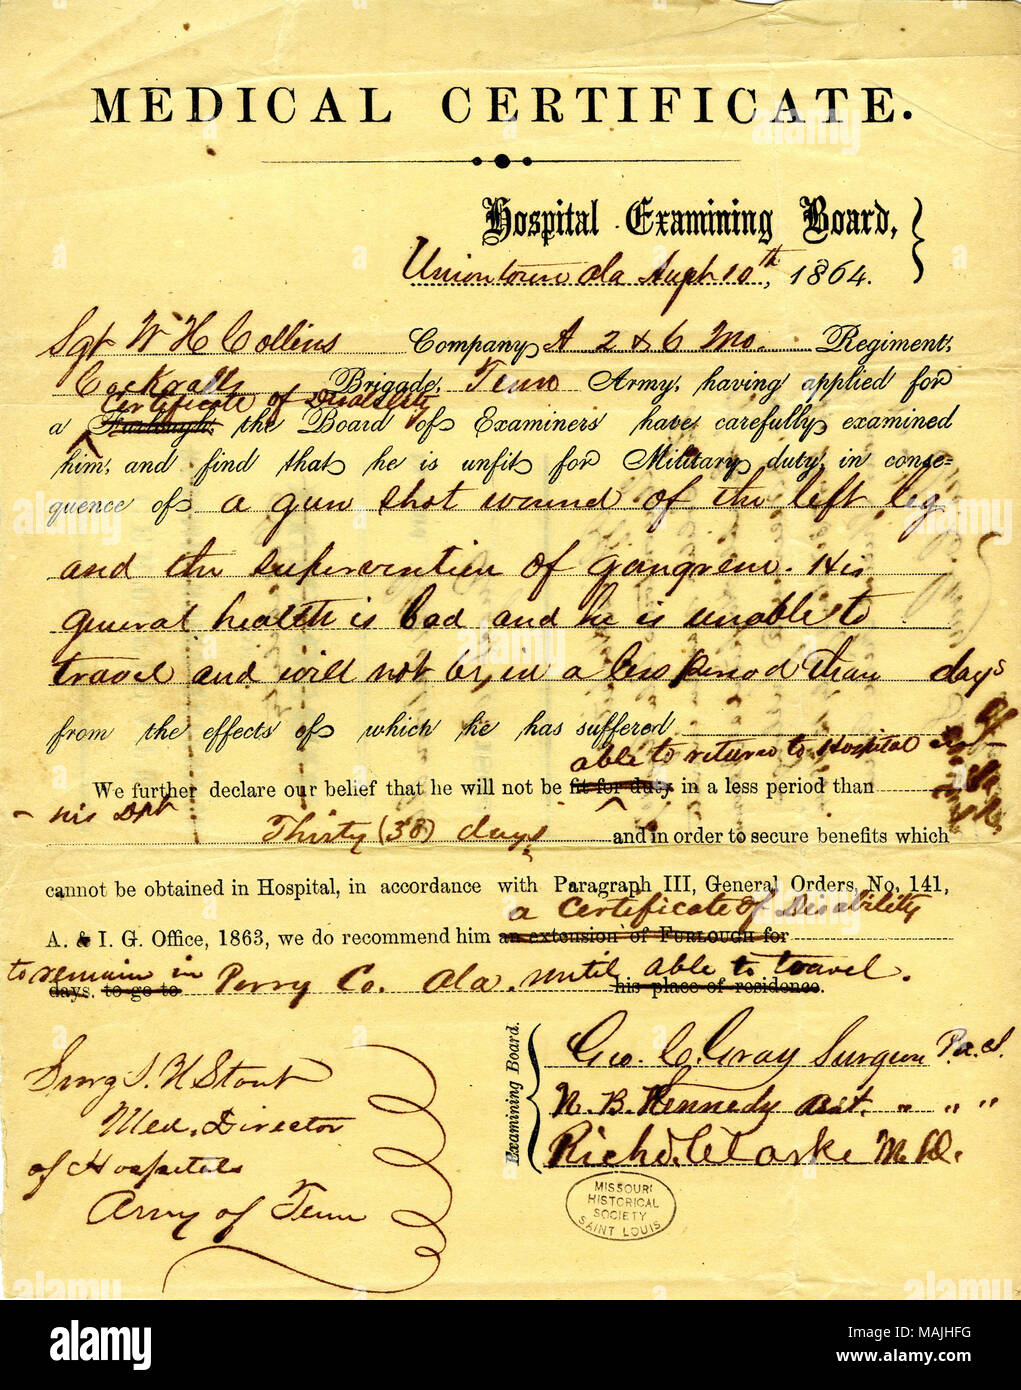 States that Collins has been examined by the Board and has been found unfit for service because of a gunshot wound in his left leg. Title: Medical certificate of Sergeant W.H. Collins, August 10, 1864  . 10 August 1864. Gray, George C. Stock Photo